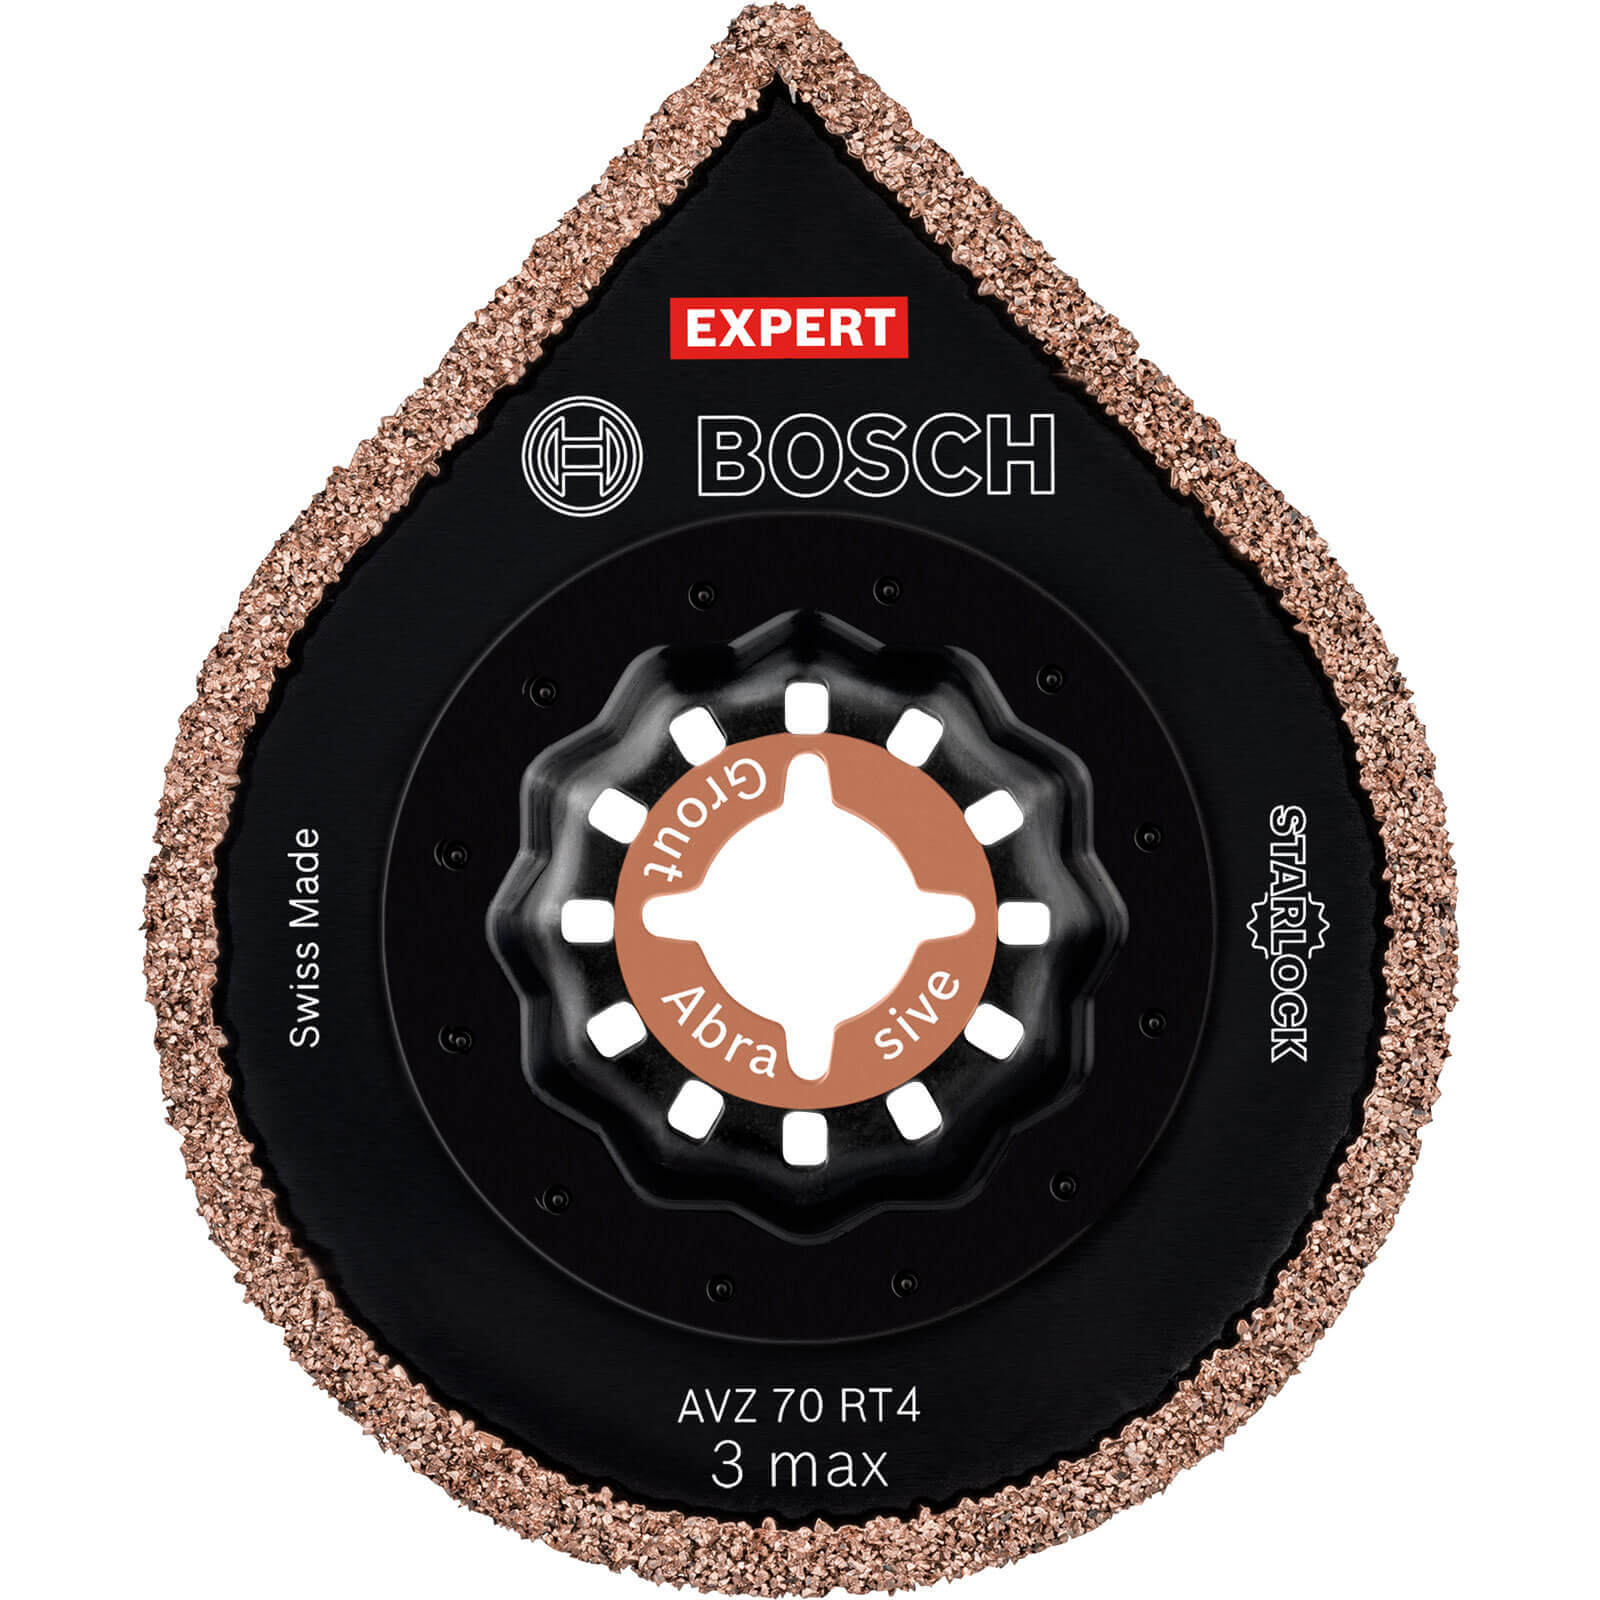 Image of Bosch Expert AVZ 70 RT4 Abrasive and Grout Oscillating Multi Tool Removal Blade 70mm Pack of 1